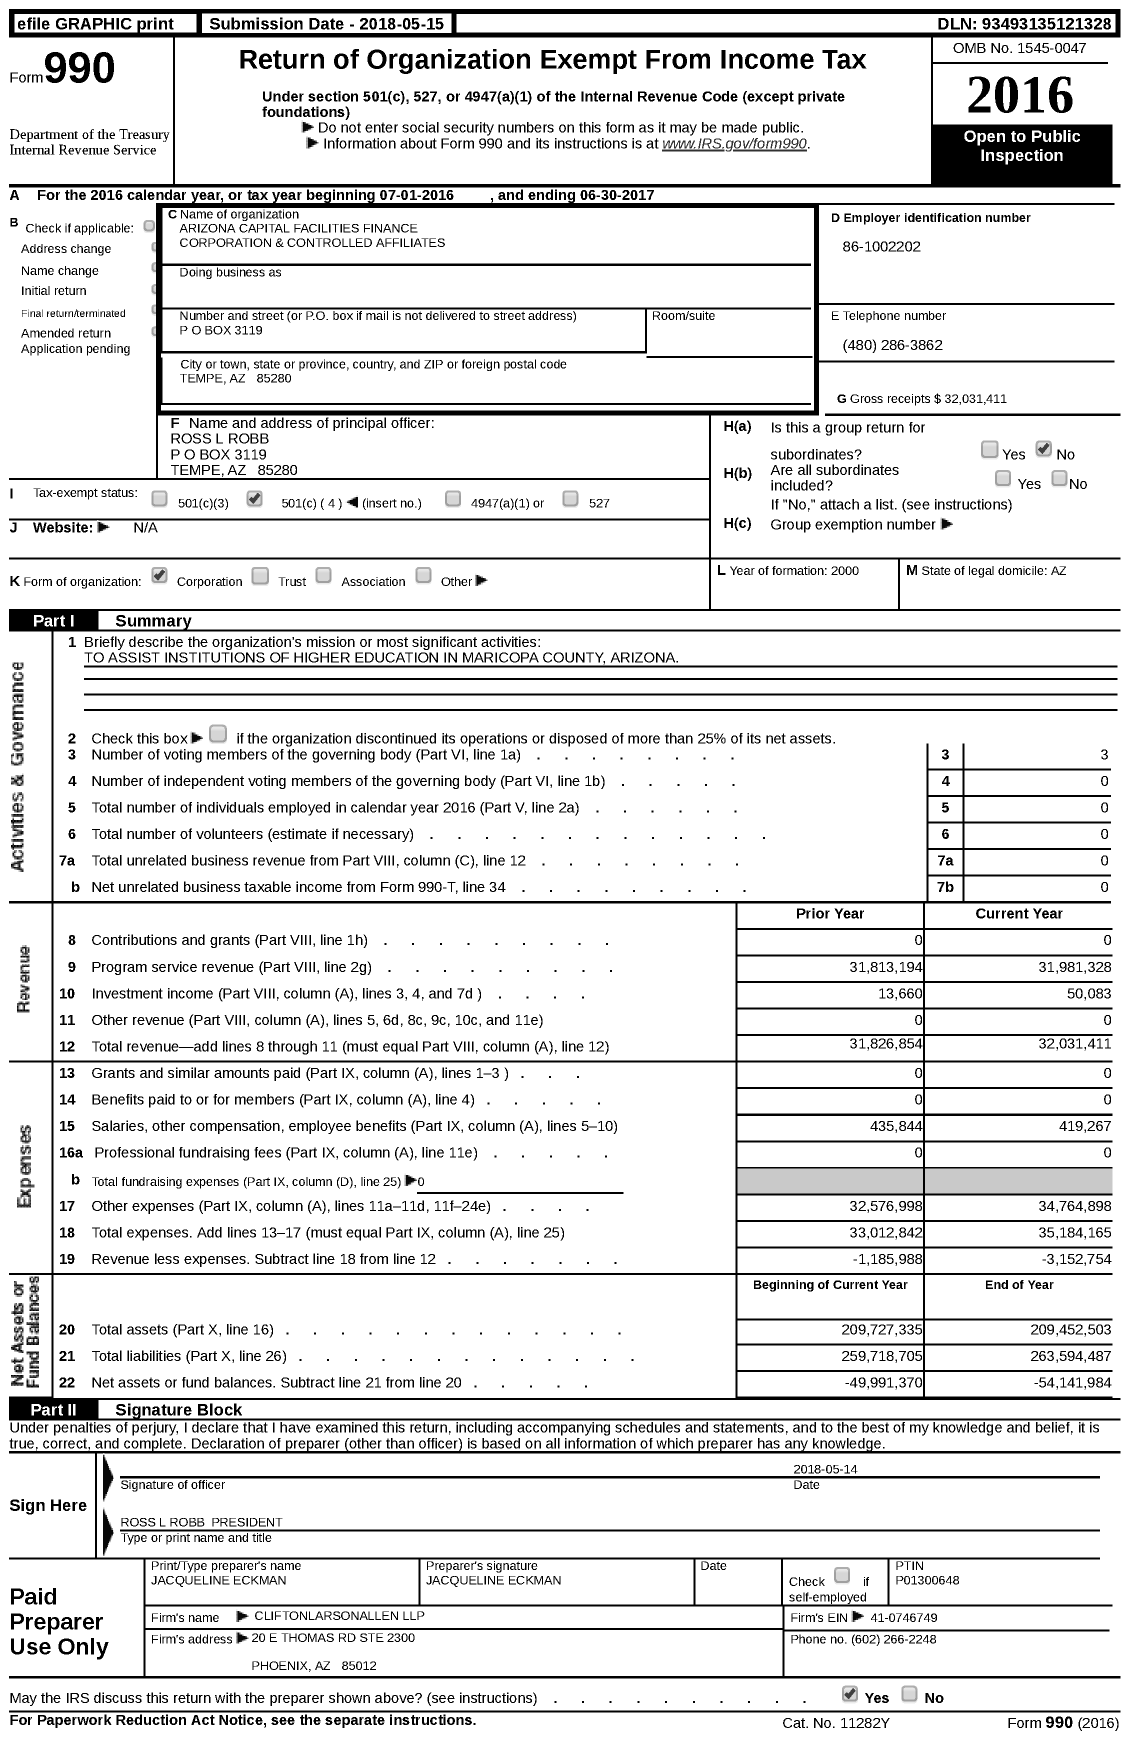 Image of first page of 2016 Form 990 for Arizona Capital Facilities Finance Corporation and Controlled Affiliates